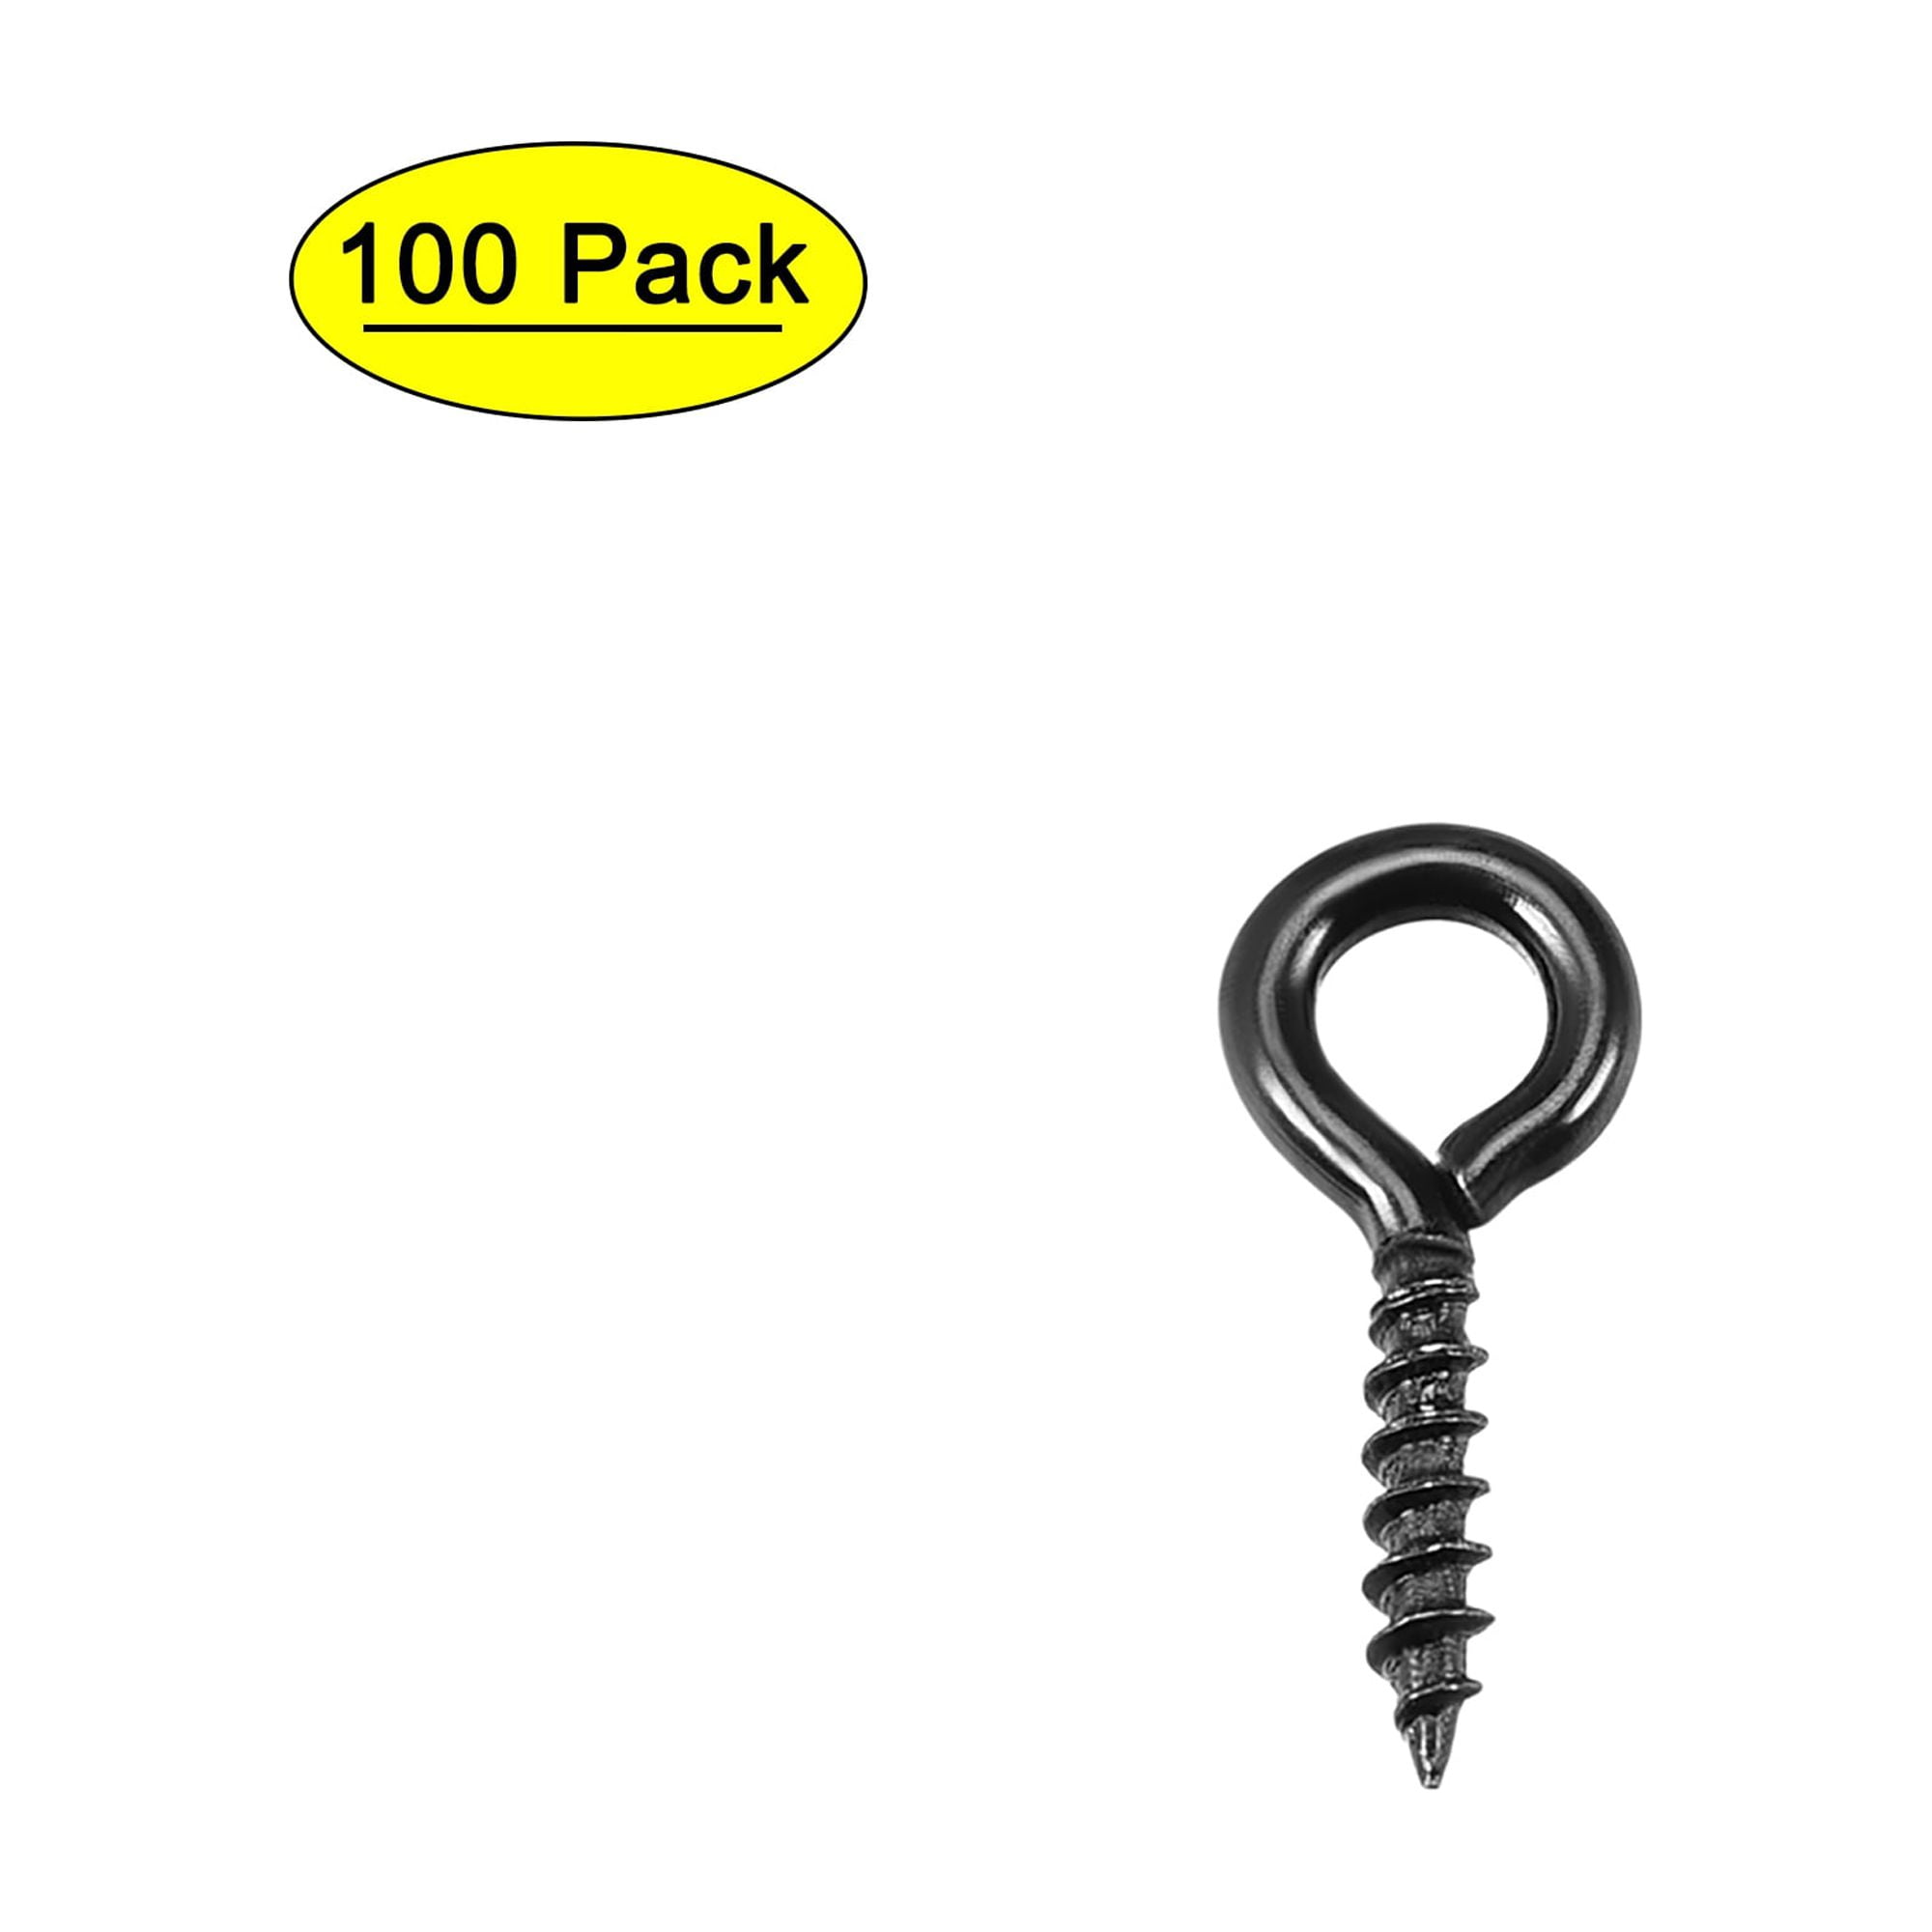 Uxcell 0.39 Small Screw Eye Hooks Self Tapping Screws Carbon Steel Black  100Pcs